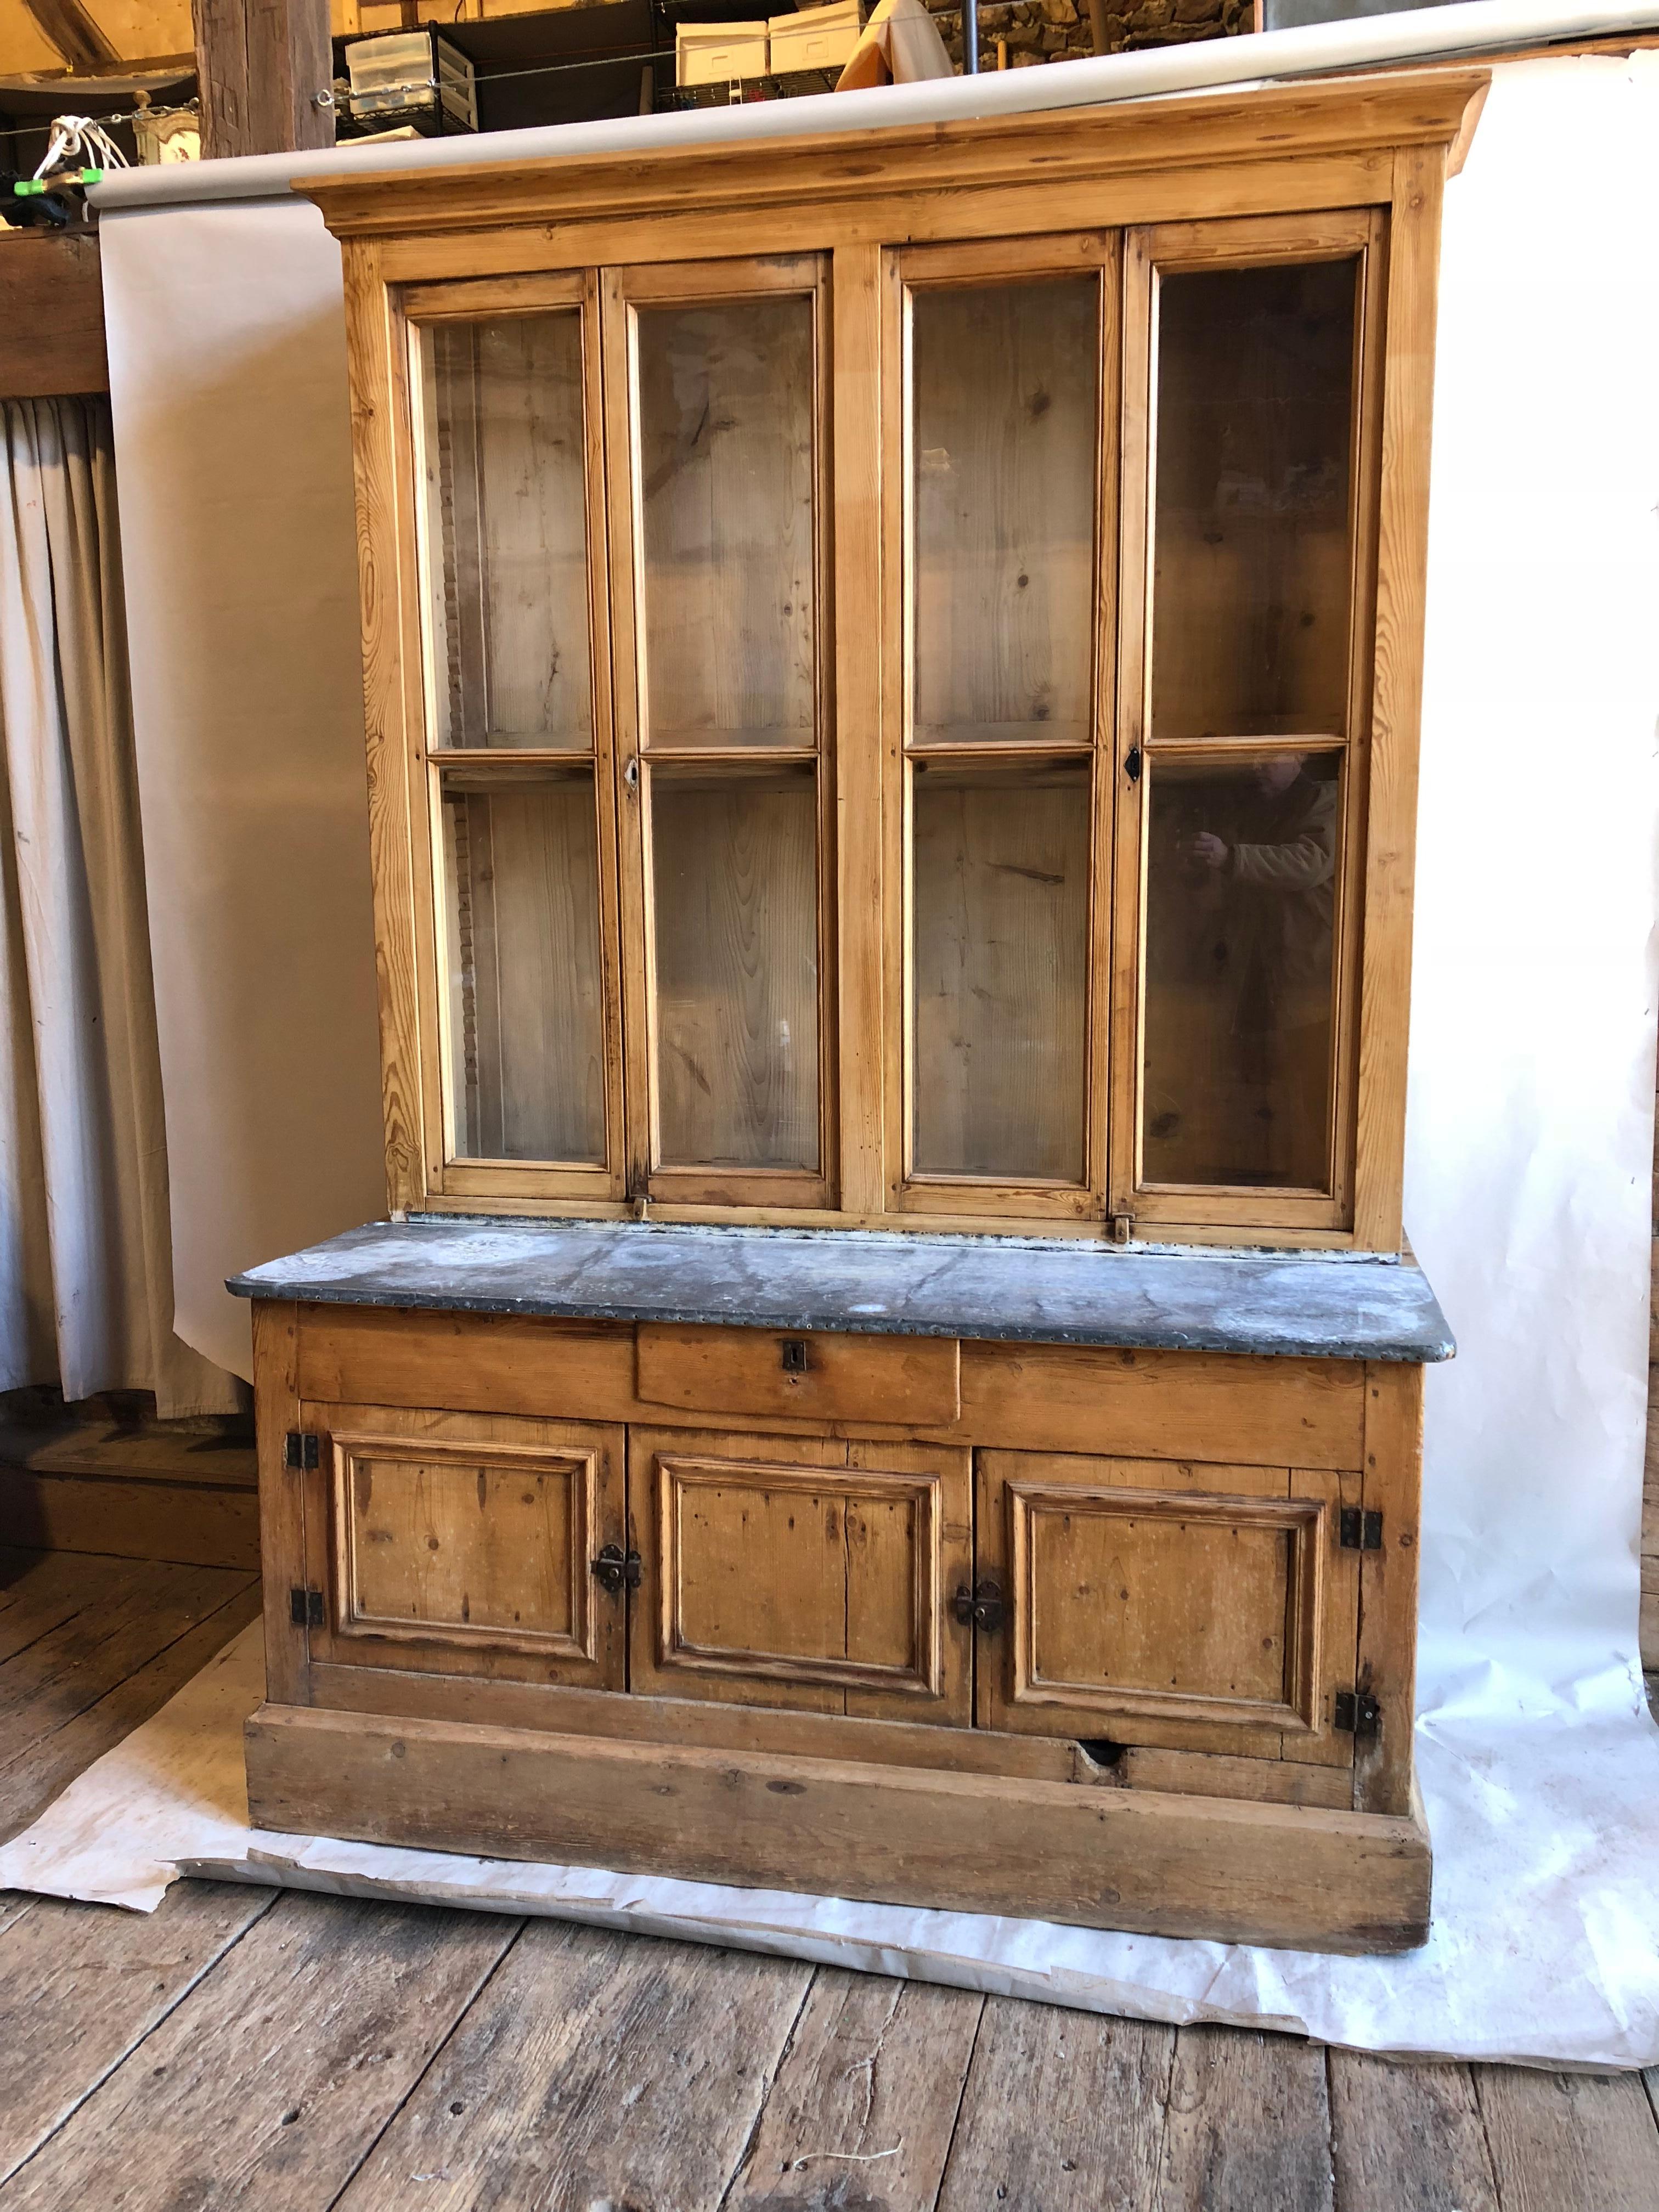 A French country kitchen cabinet in 2 parts, in stripped pine with glazed doors and a zinc work surface, late 18th century. Four glazed doors with adjustable shelves in upper cabinet which rests on a zinc-top lower cabinet with drawer and lower